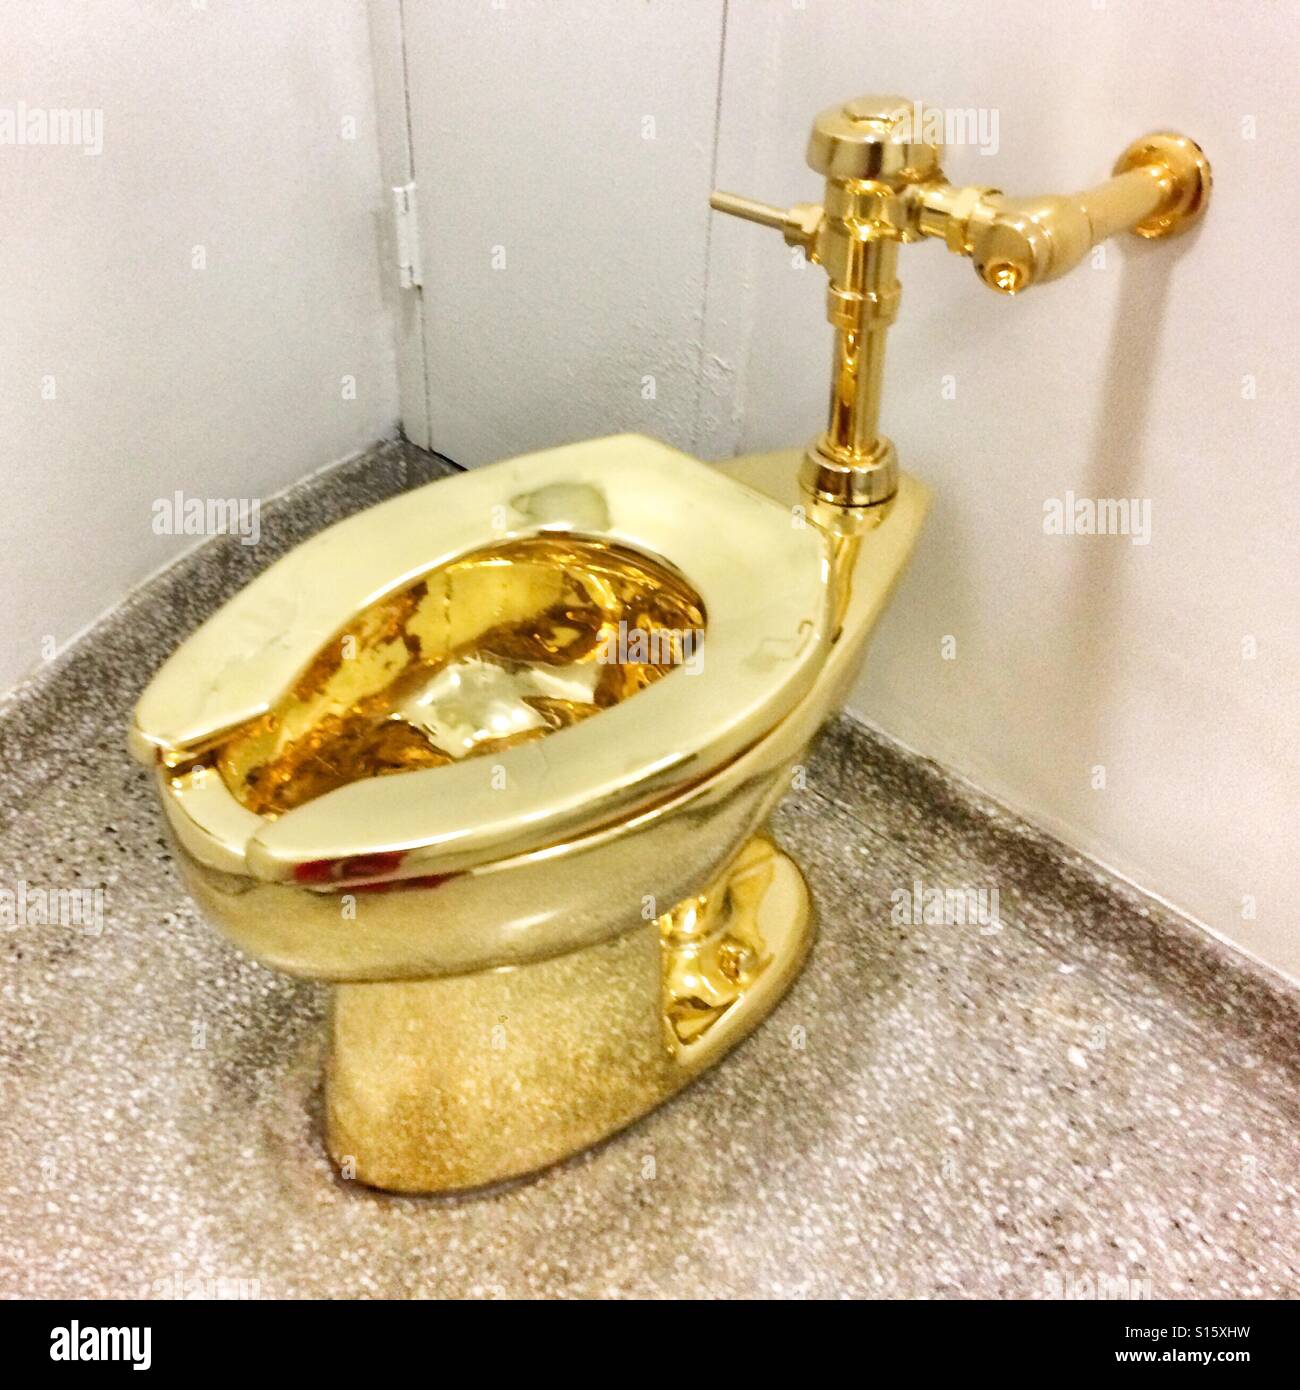 Maurizio Cattelan: “America” a solid gold toilet installed on the forth  floor of the Guggenheim museum in New York City. United States of America  Stock Photo - Alamy